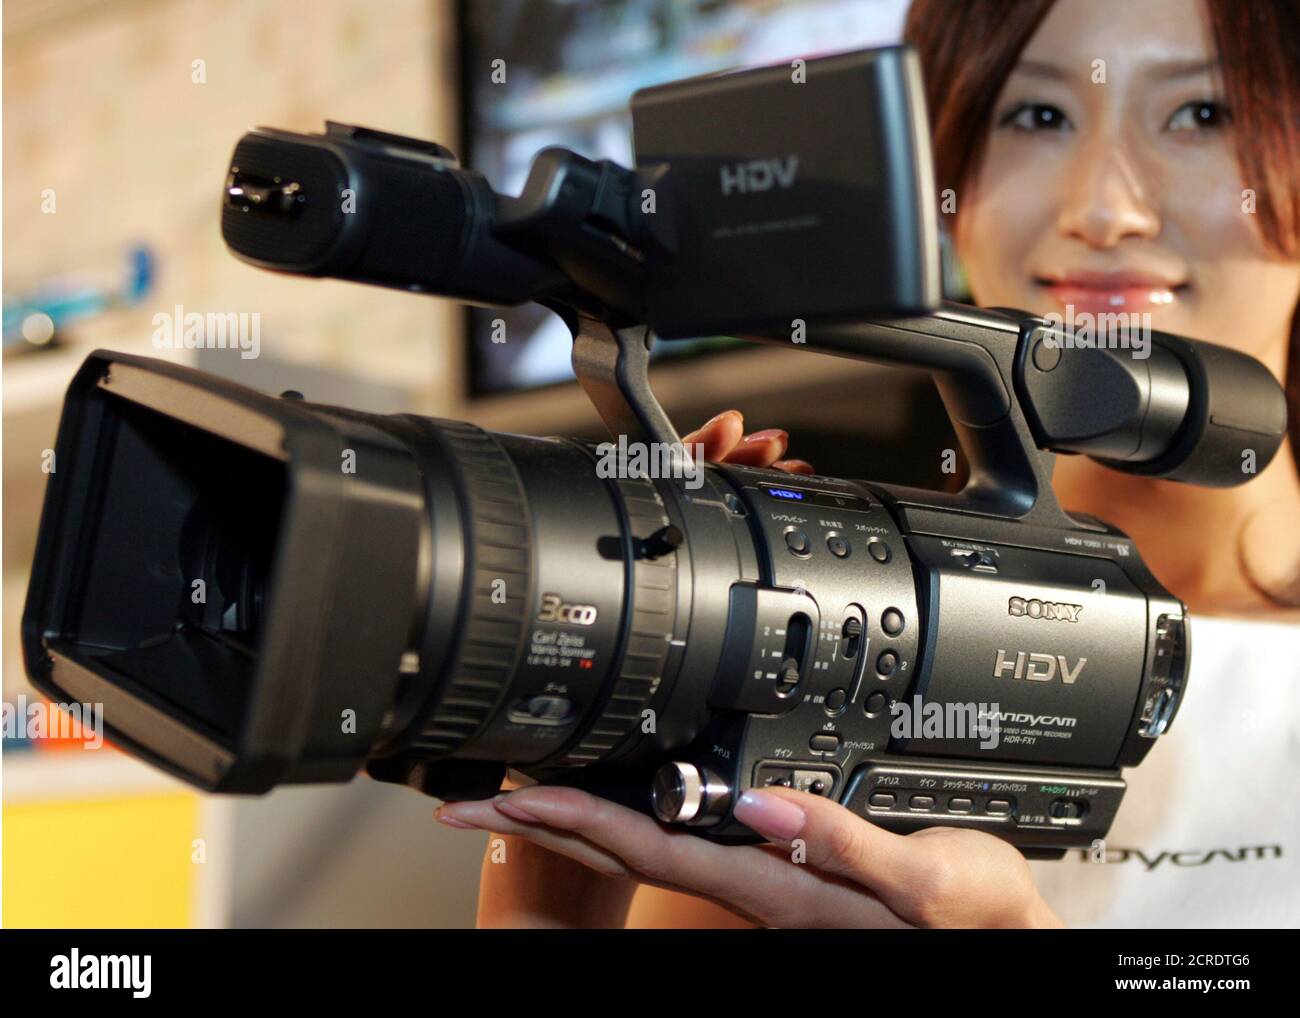 Sony Corp. unveils its HDR-FX1 digital high-definition video camera  recorder in Tokyo September 7, 2004. Sony said it is the world's first  consumer-use camcorder bringing HD-quality video at resolutions of up to